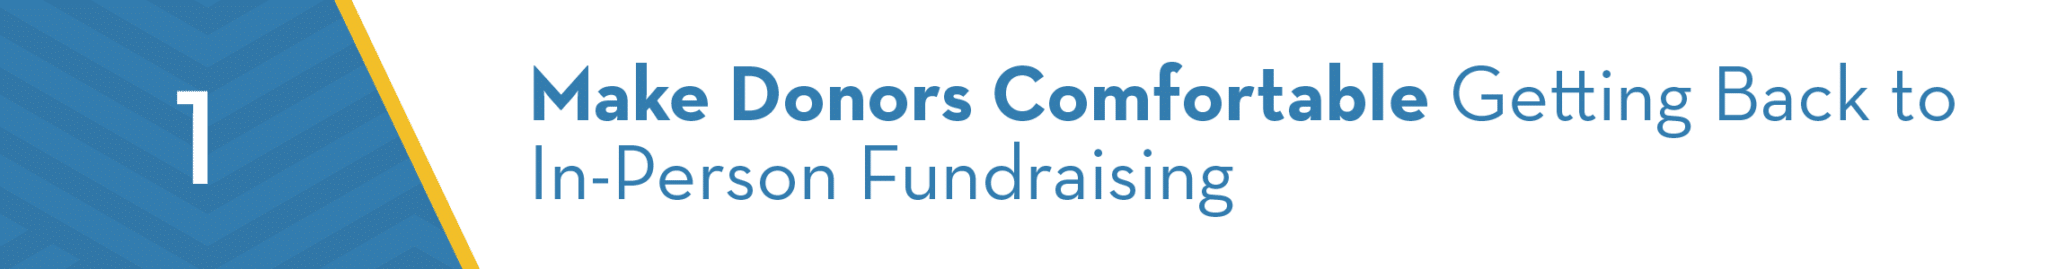 Make Donors Comfortable Getting Back to In-Person Fundraising